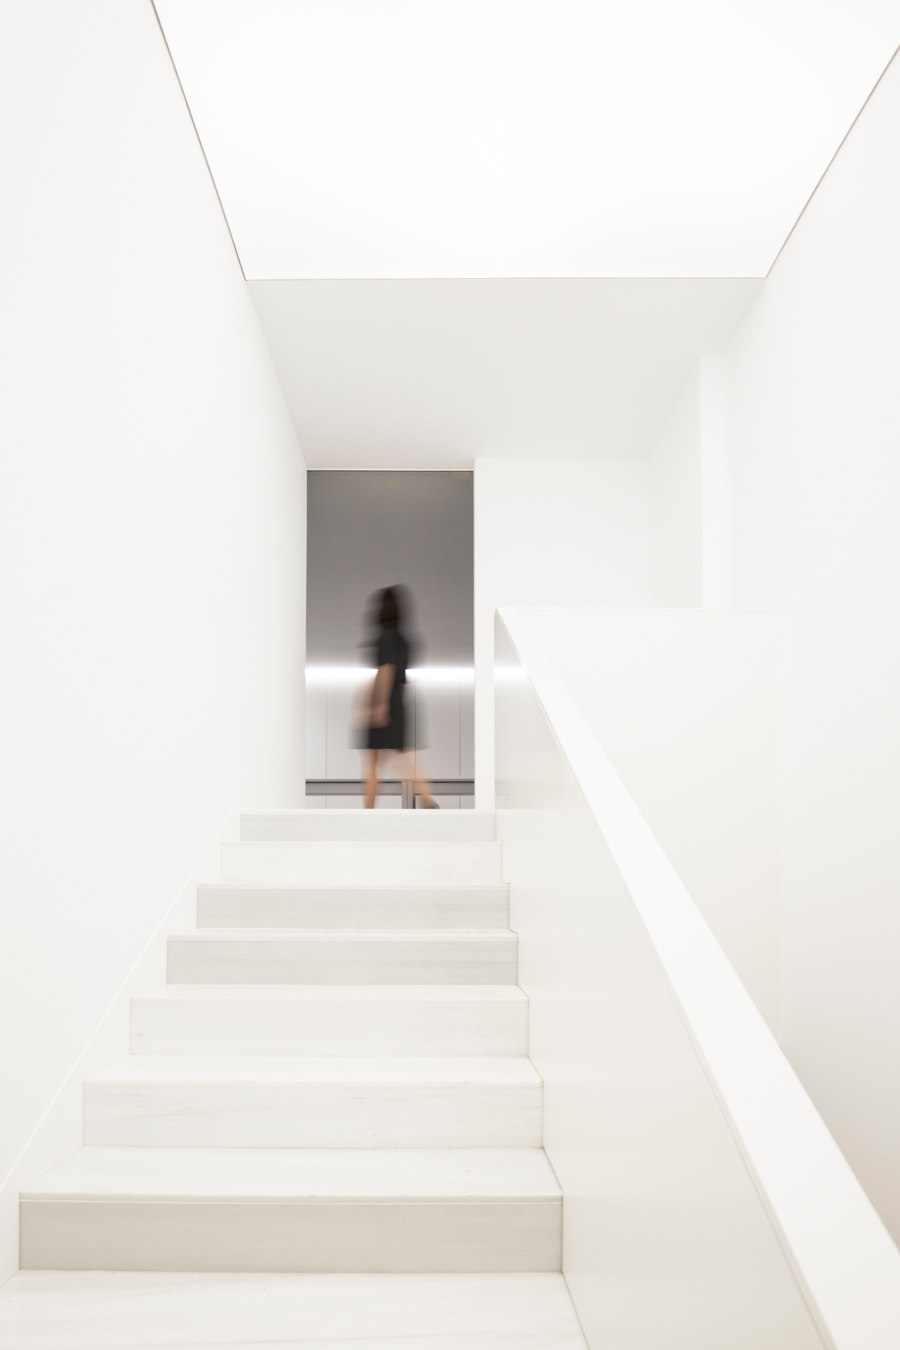 ARV Offices by Fran Silvestre Arquitectos | Office facilities